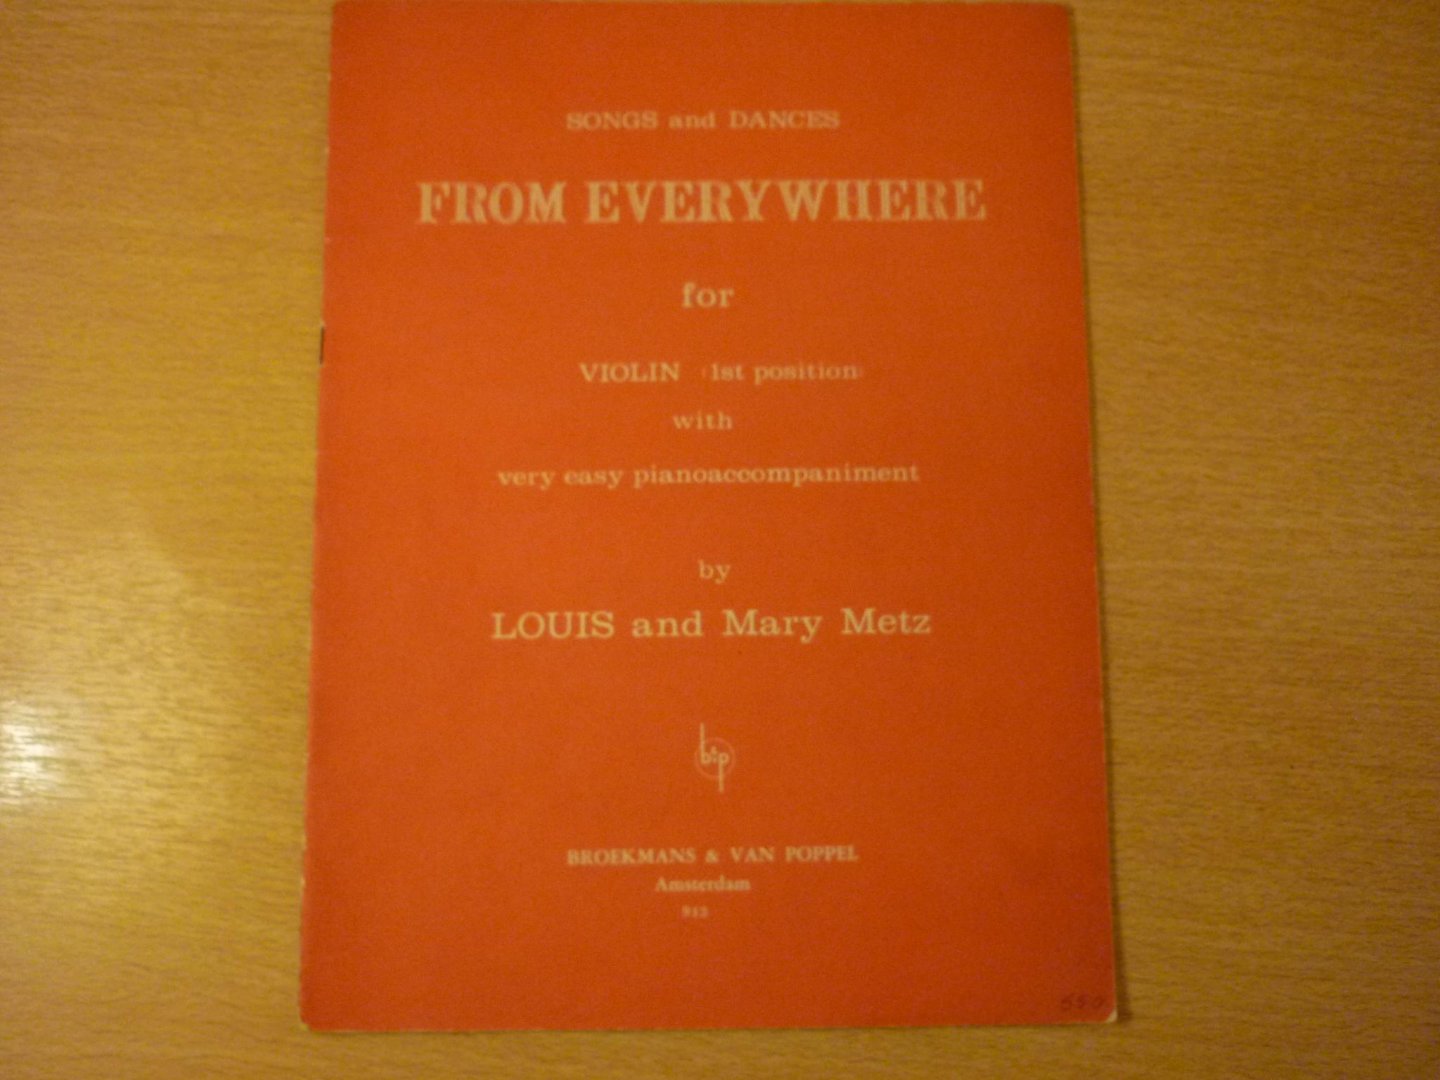 Metz; Louis and Mary - Songs and Dances from Everywhere; For violin 1st position with very easy piano-accompaniment